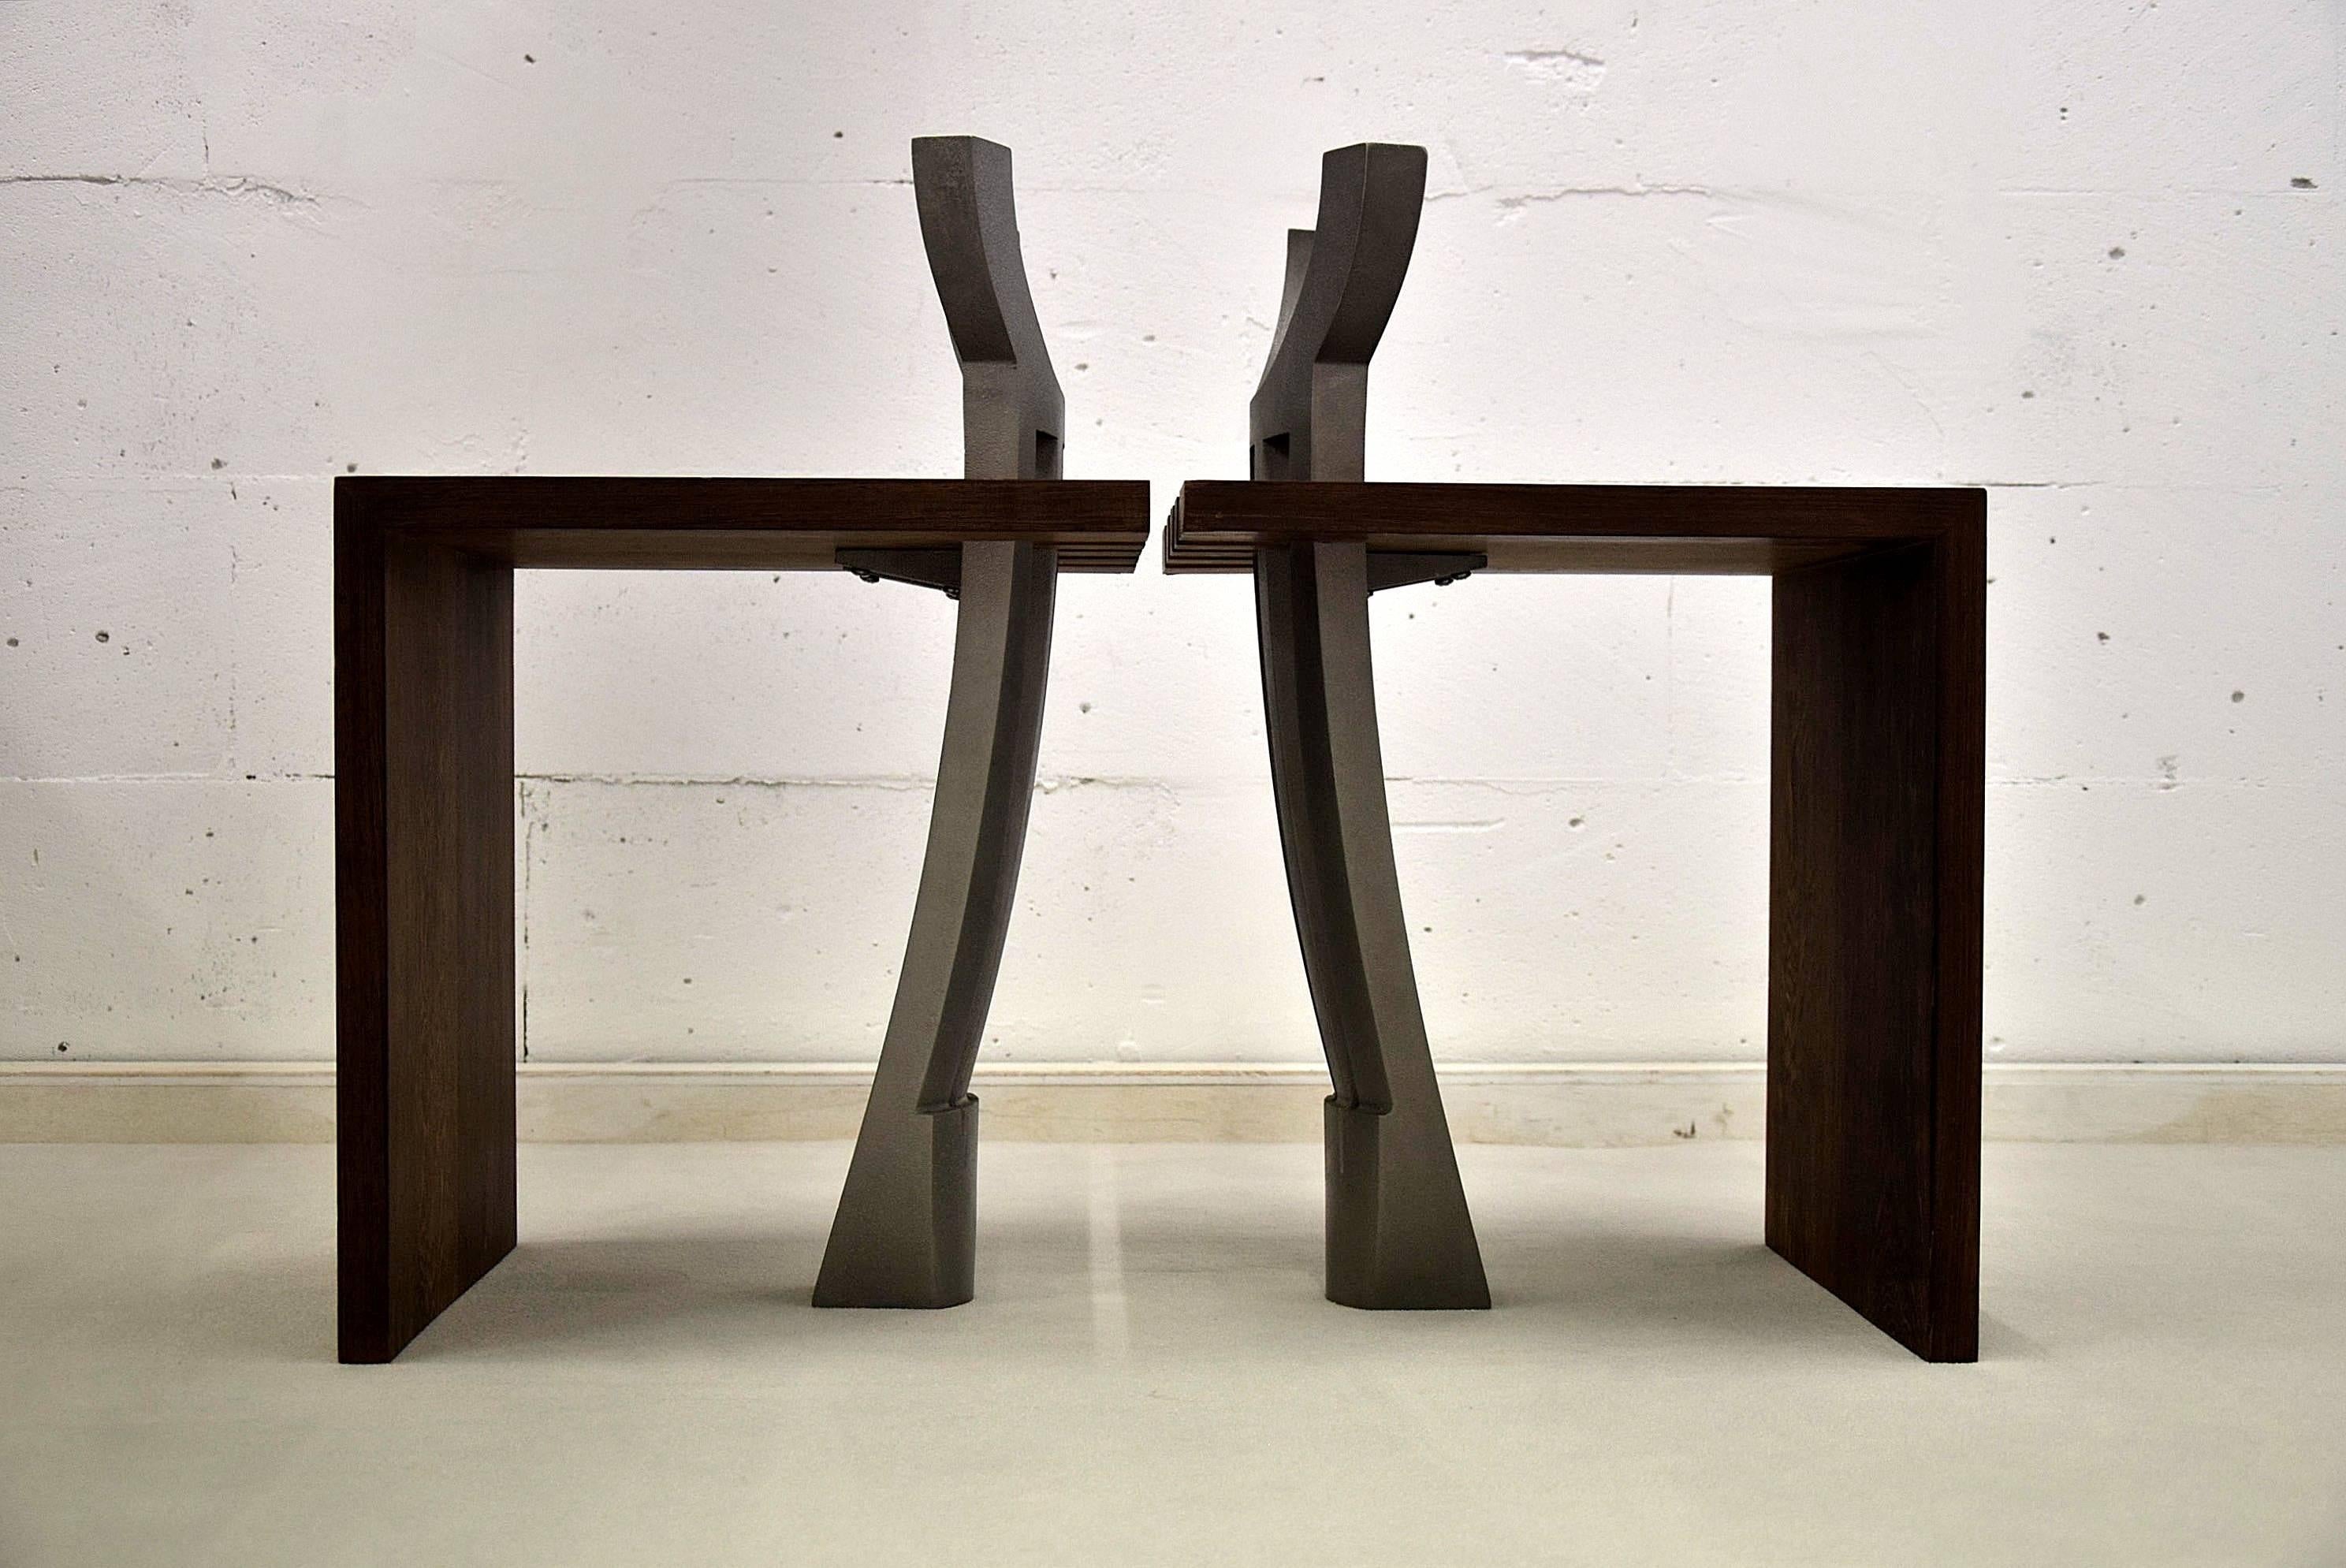 Two very limited edition sculpture stools created in 1998 by Ron van de Ven (1956 Maastricht, the Netherlands).

Even though these are numbered 1 & 2 of 15 pcs, the artist told me only six were ever made.

The stools are made of solid wenge and